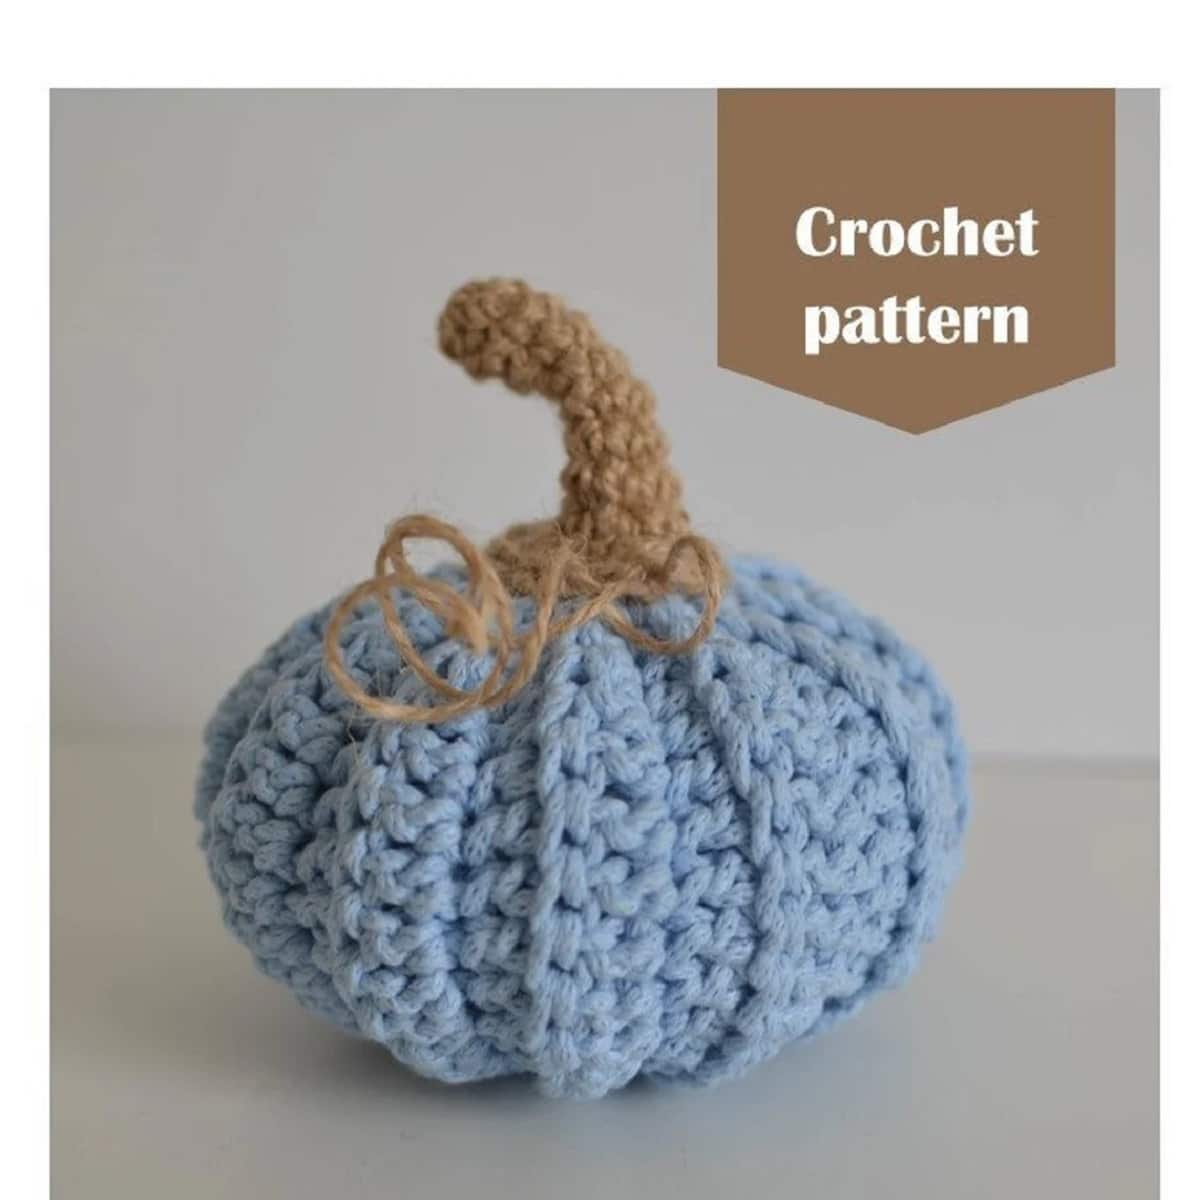 Small blue crochet pumpkin with a brown stem at the top on a white background.